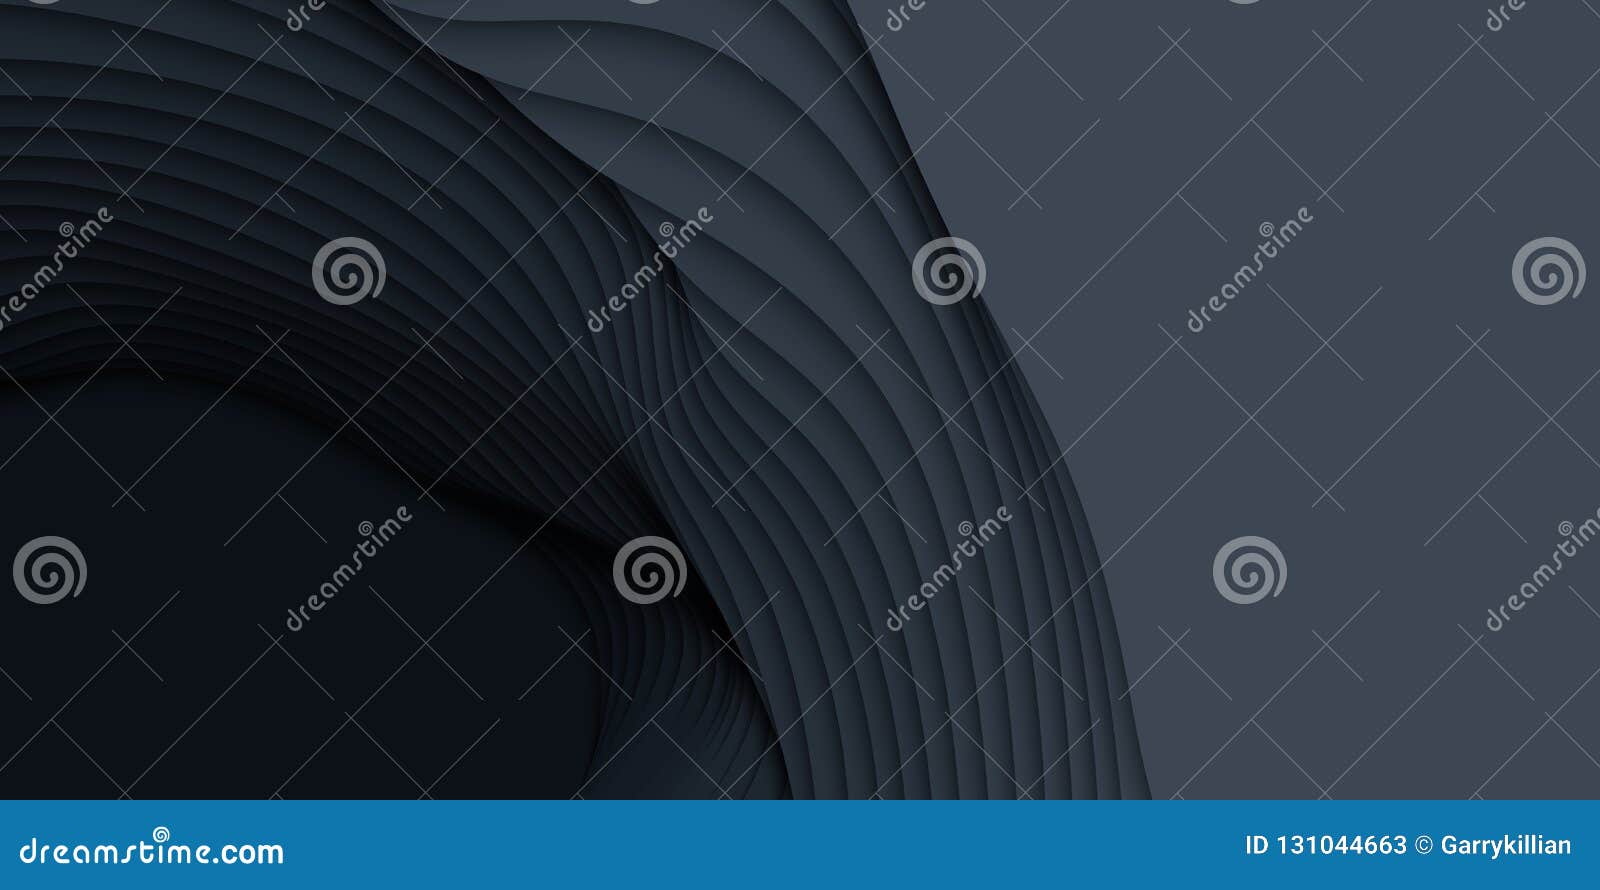 Vector 3d Abstract Background With Paper Cut Shapes Dark